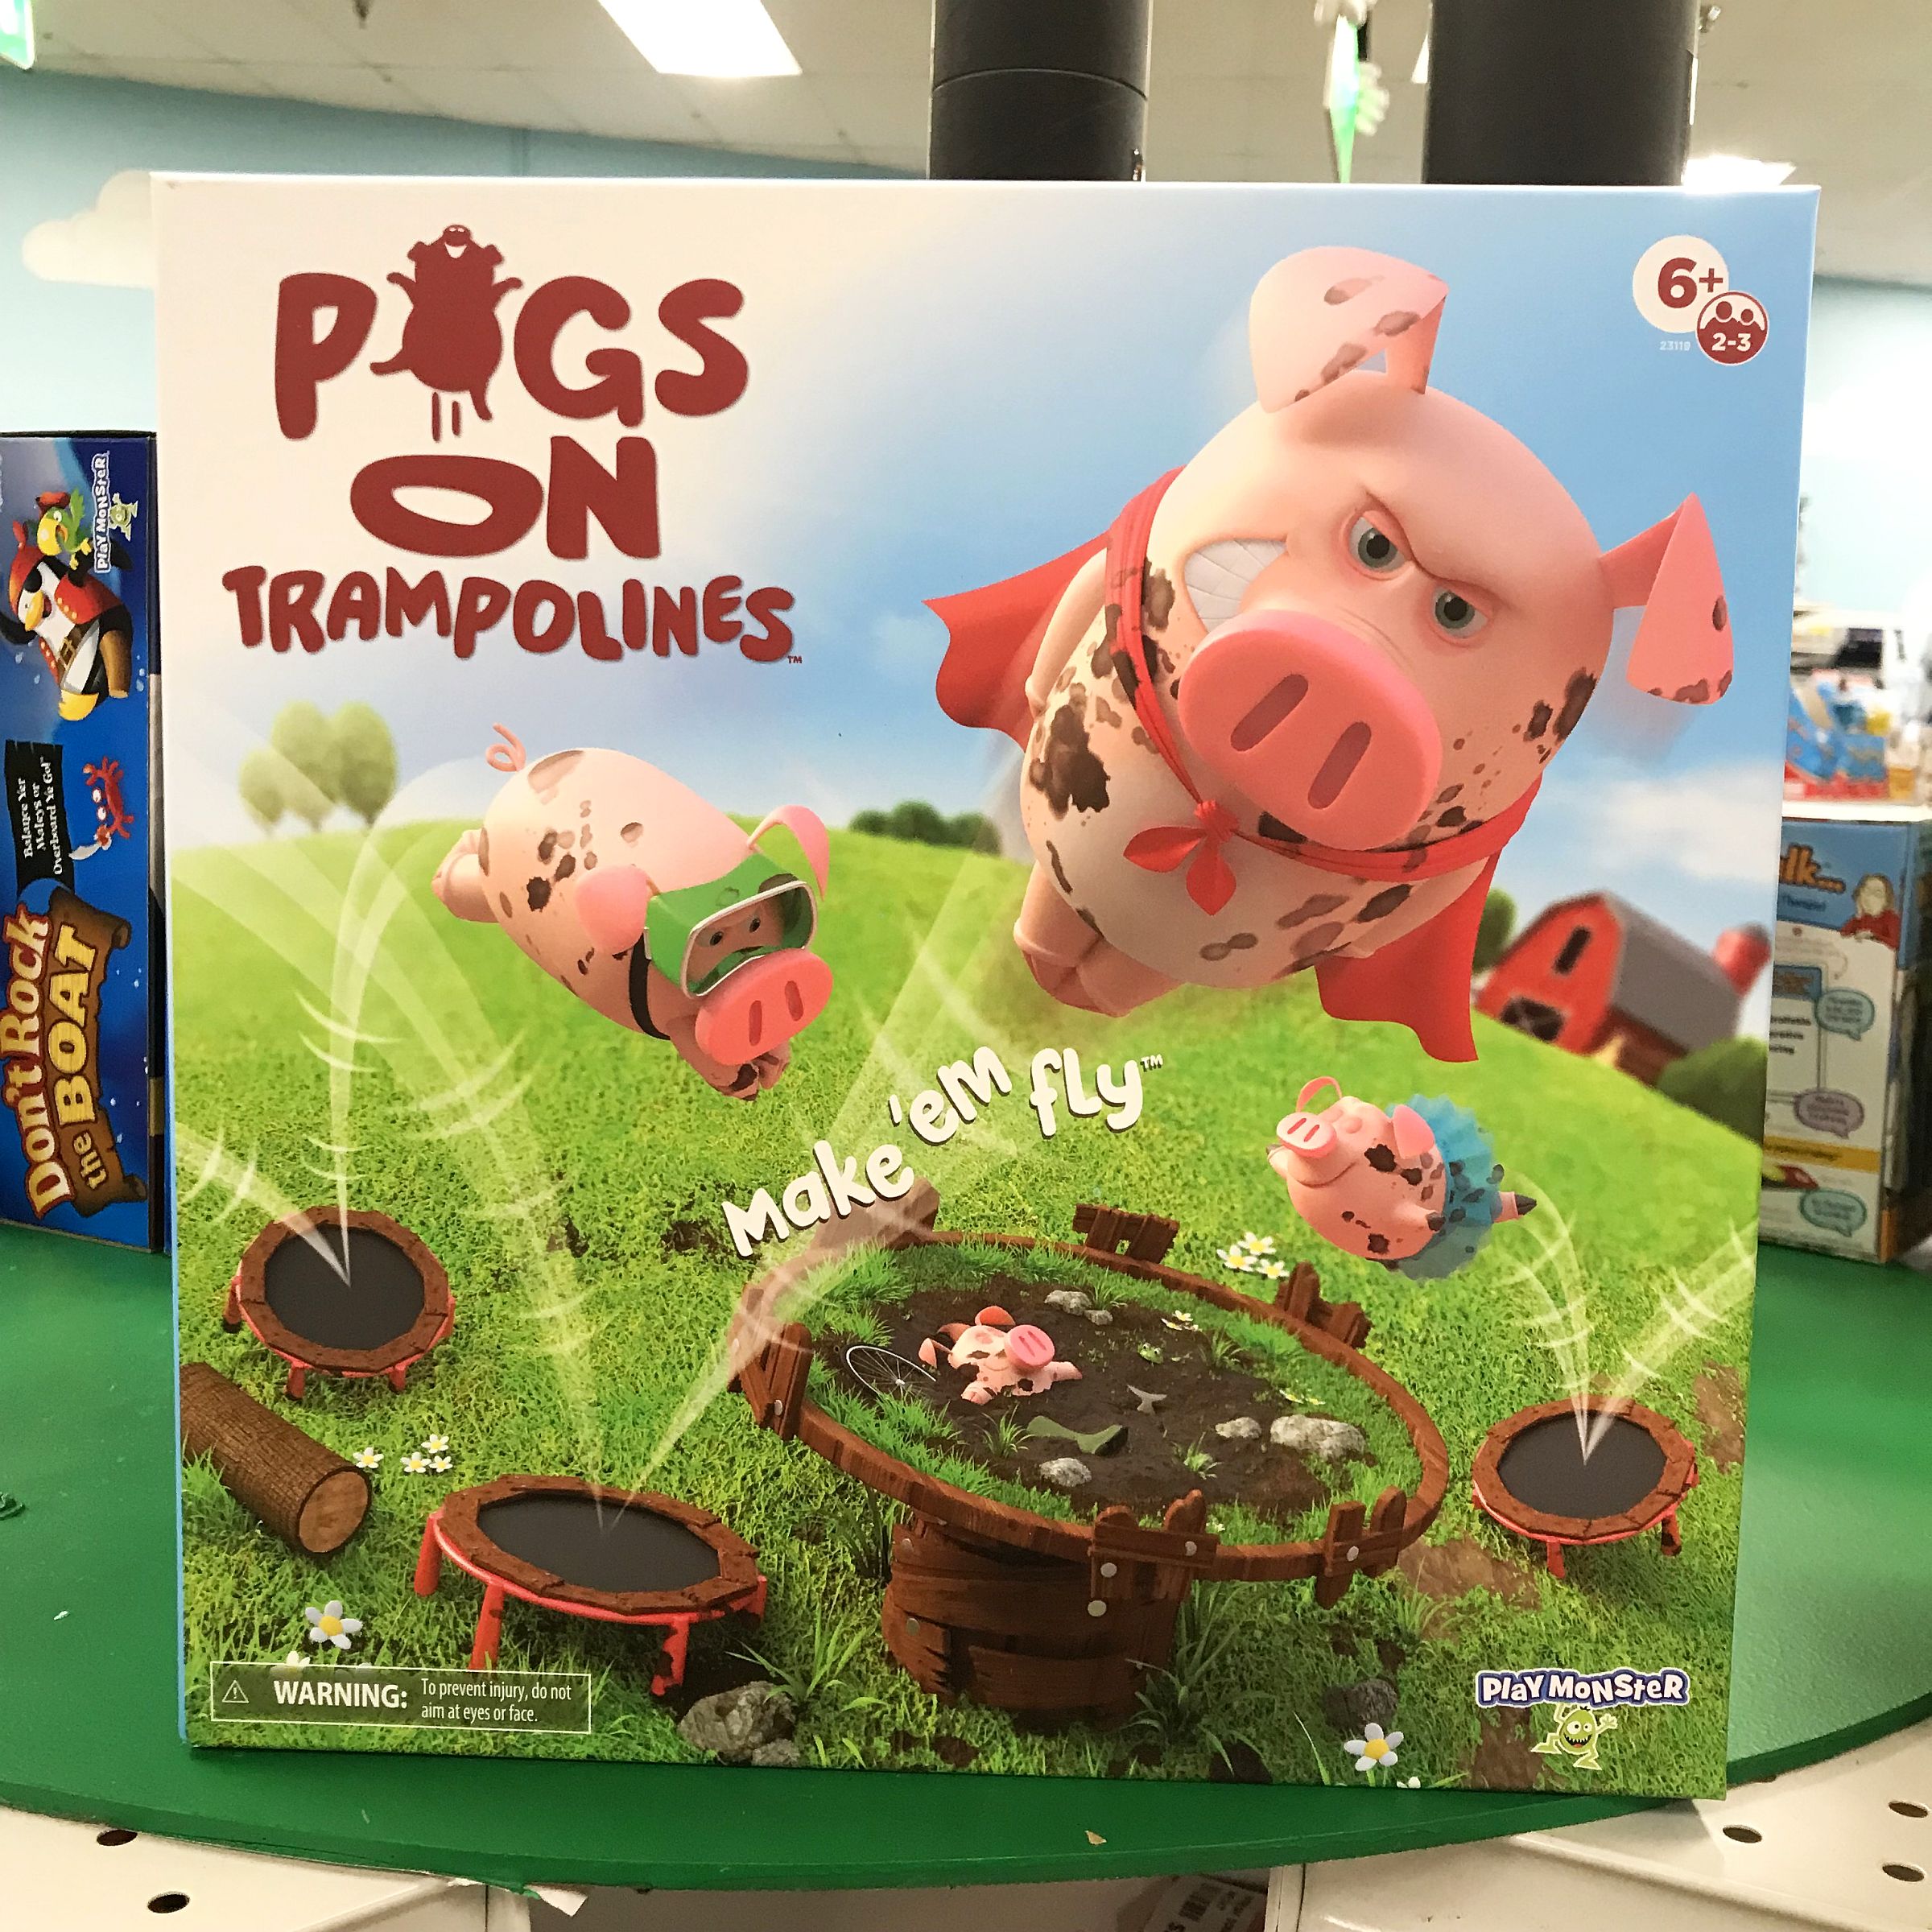 Pigs-on-Trampolines image